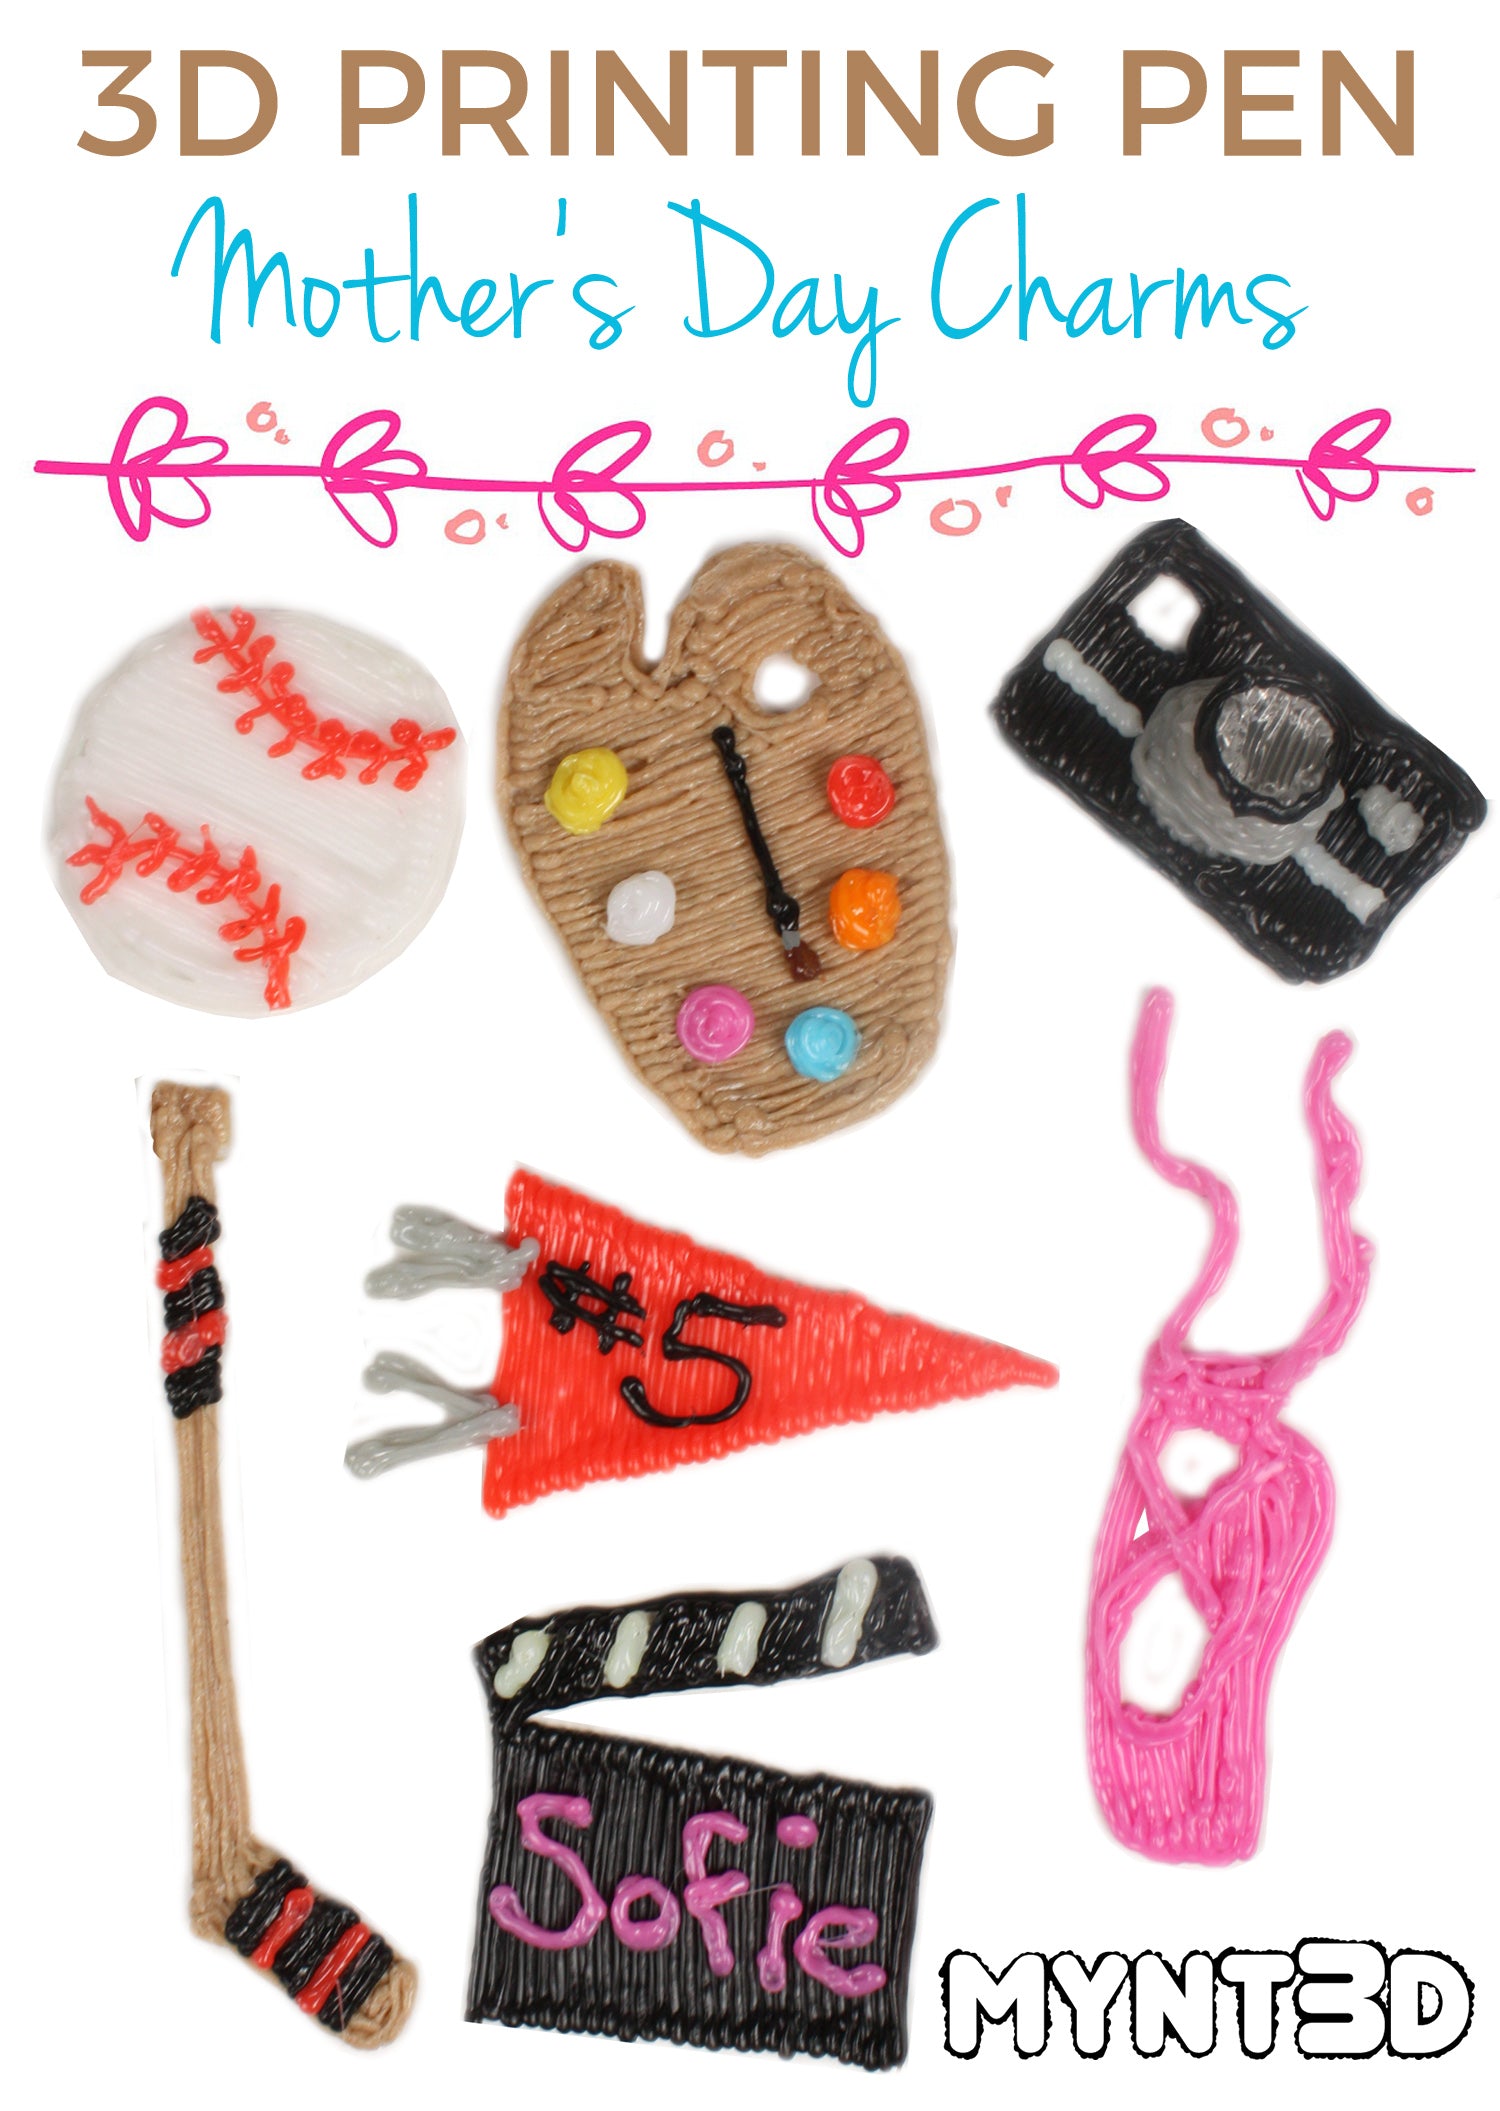 4 Valentine's Day Projects to Make with a 3D Pen - MYNT3D